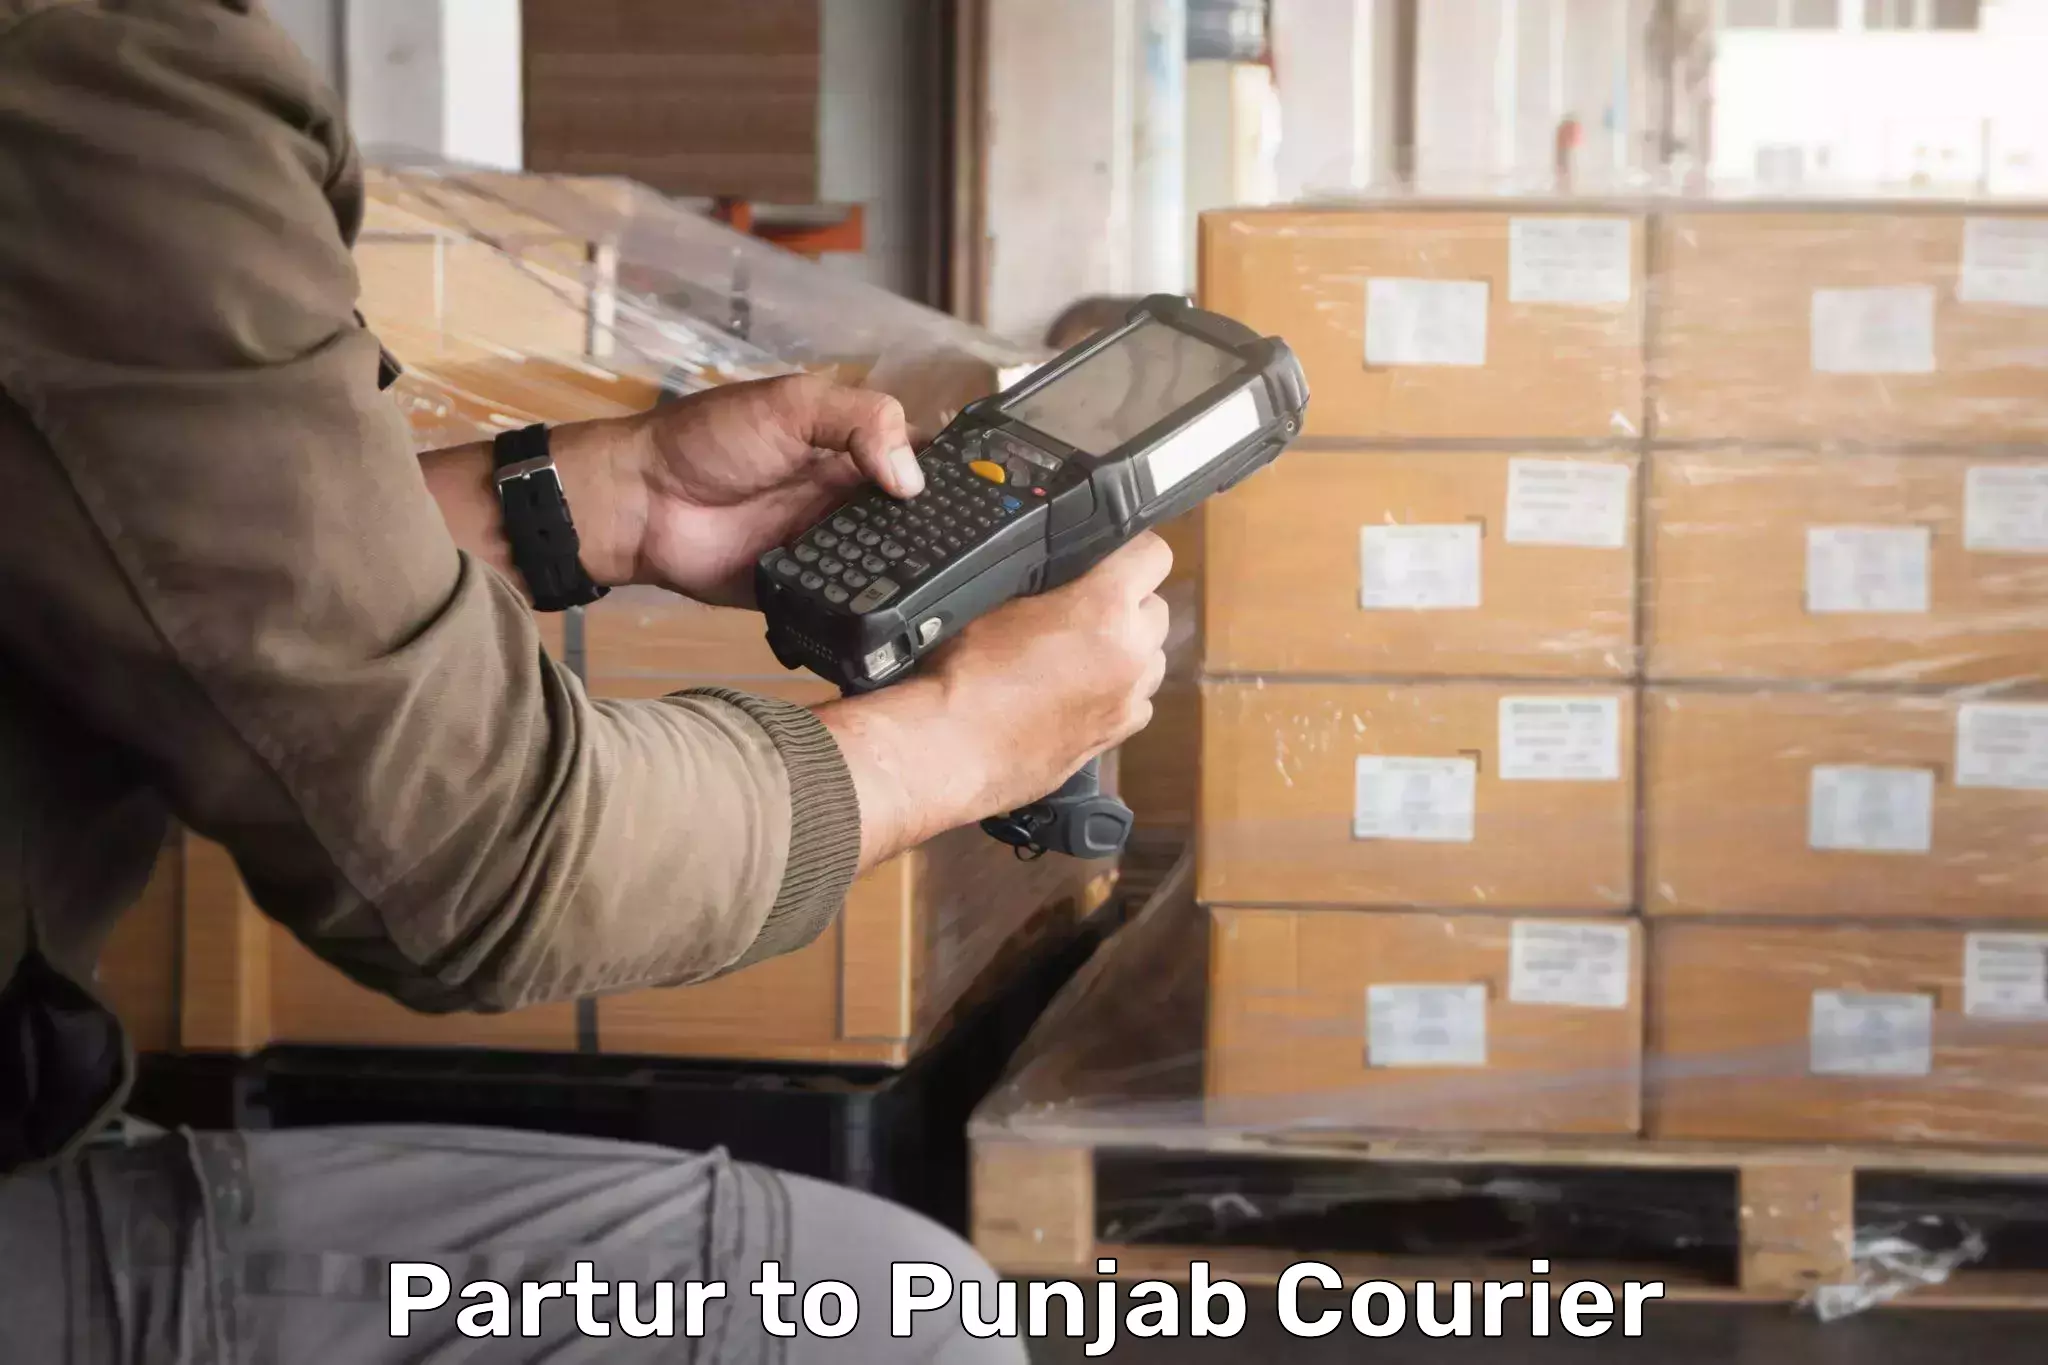 Reliable package handling Partur to Ajnala